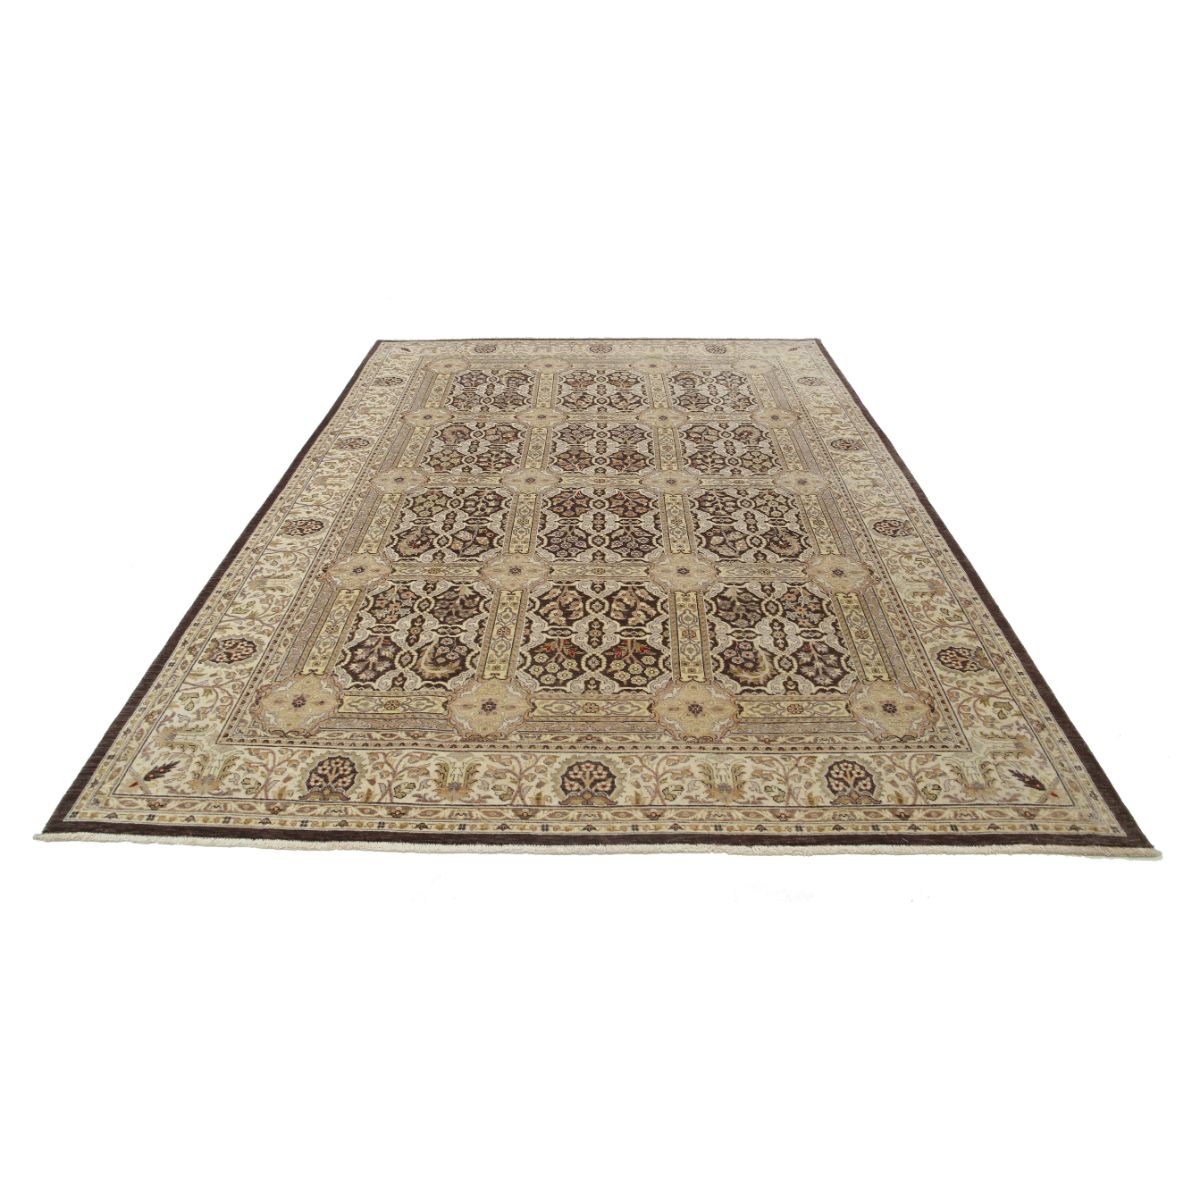 Ziegler 7'0" X 10'0" Wool Hand-Knotted Rug